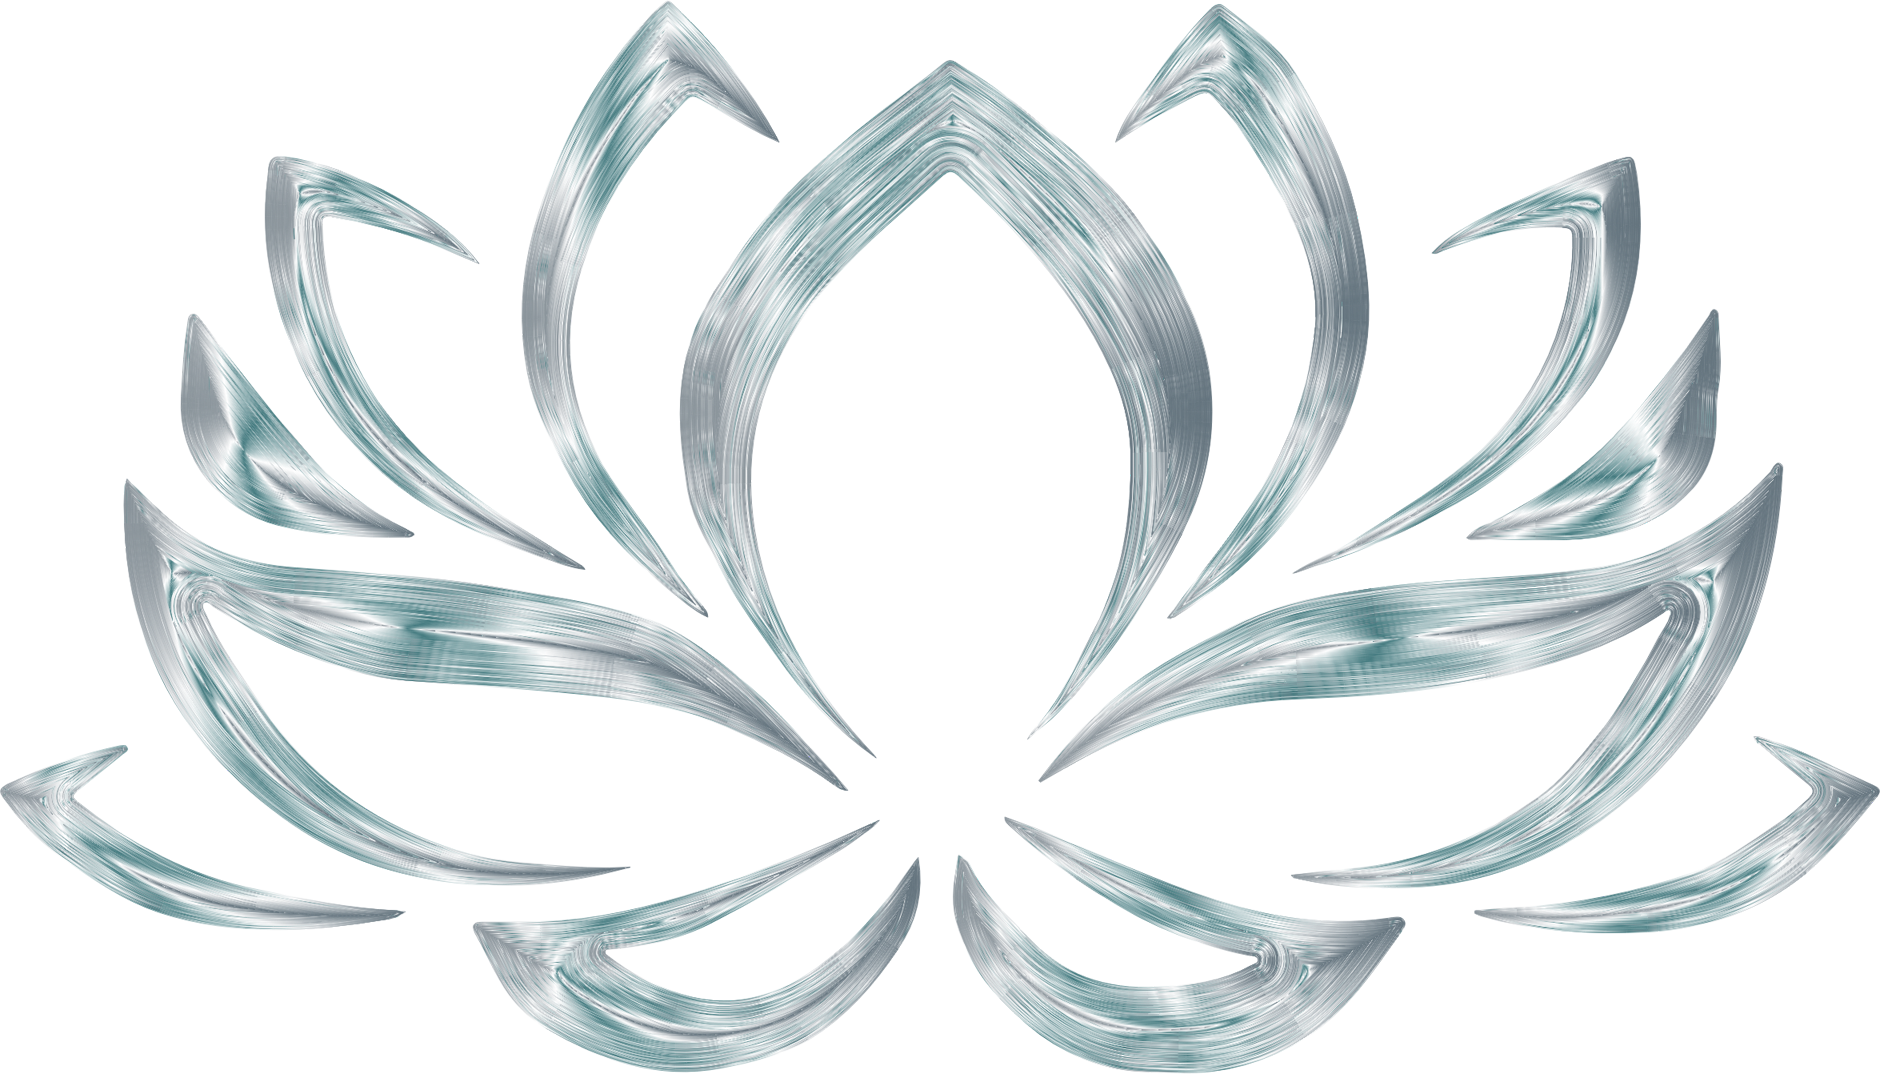 Silver Lotus Flower Symbol for Wallpaper - HD Wallpapers | Wallpapers ...